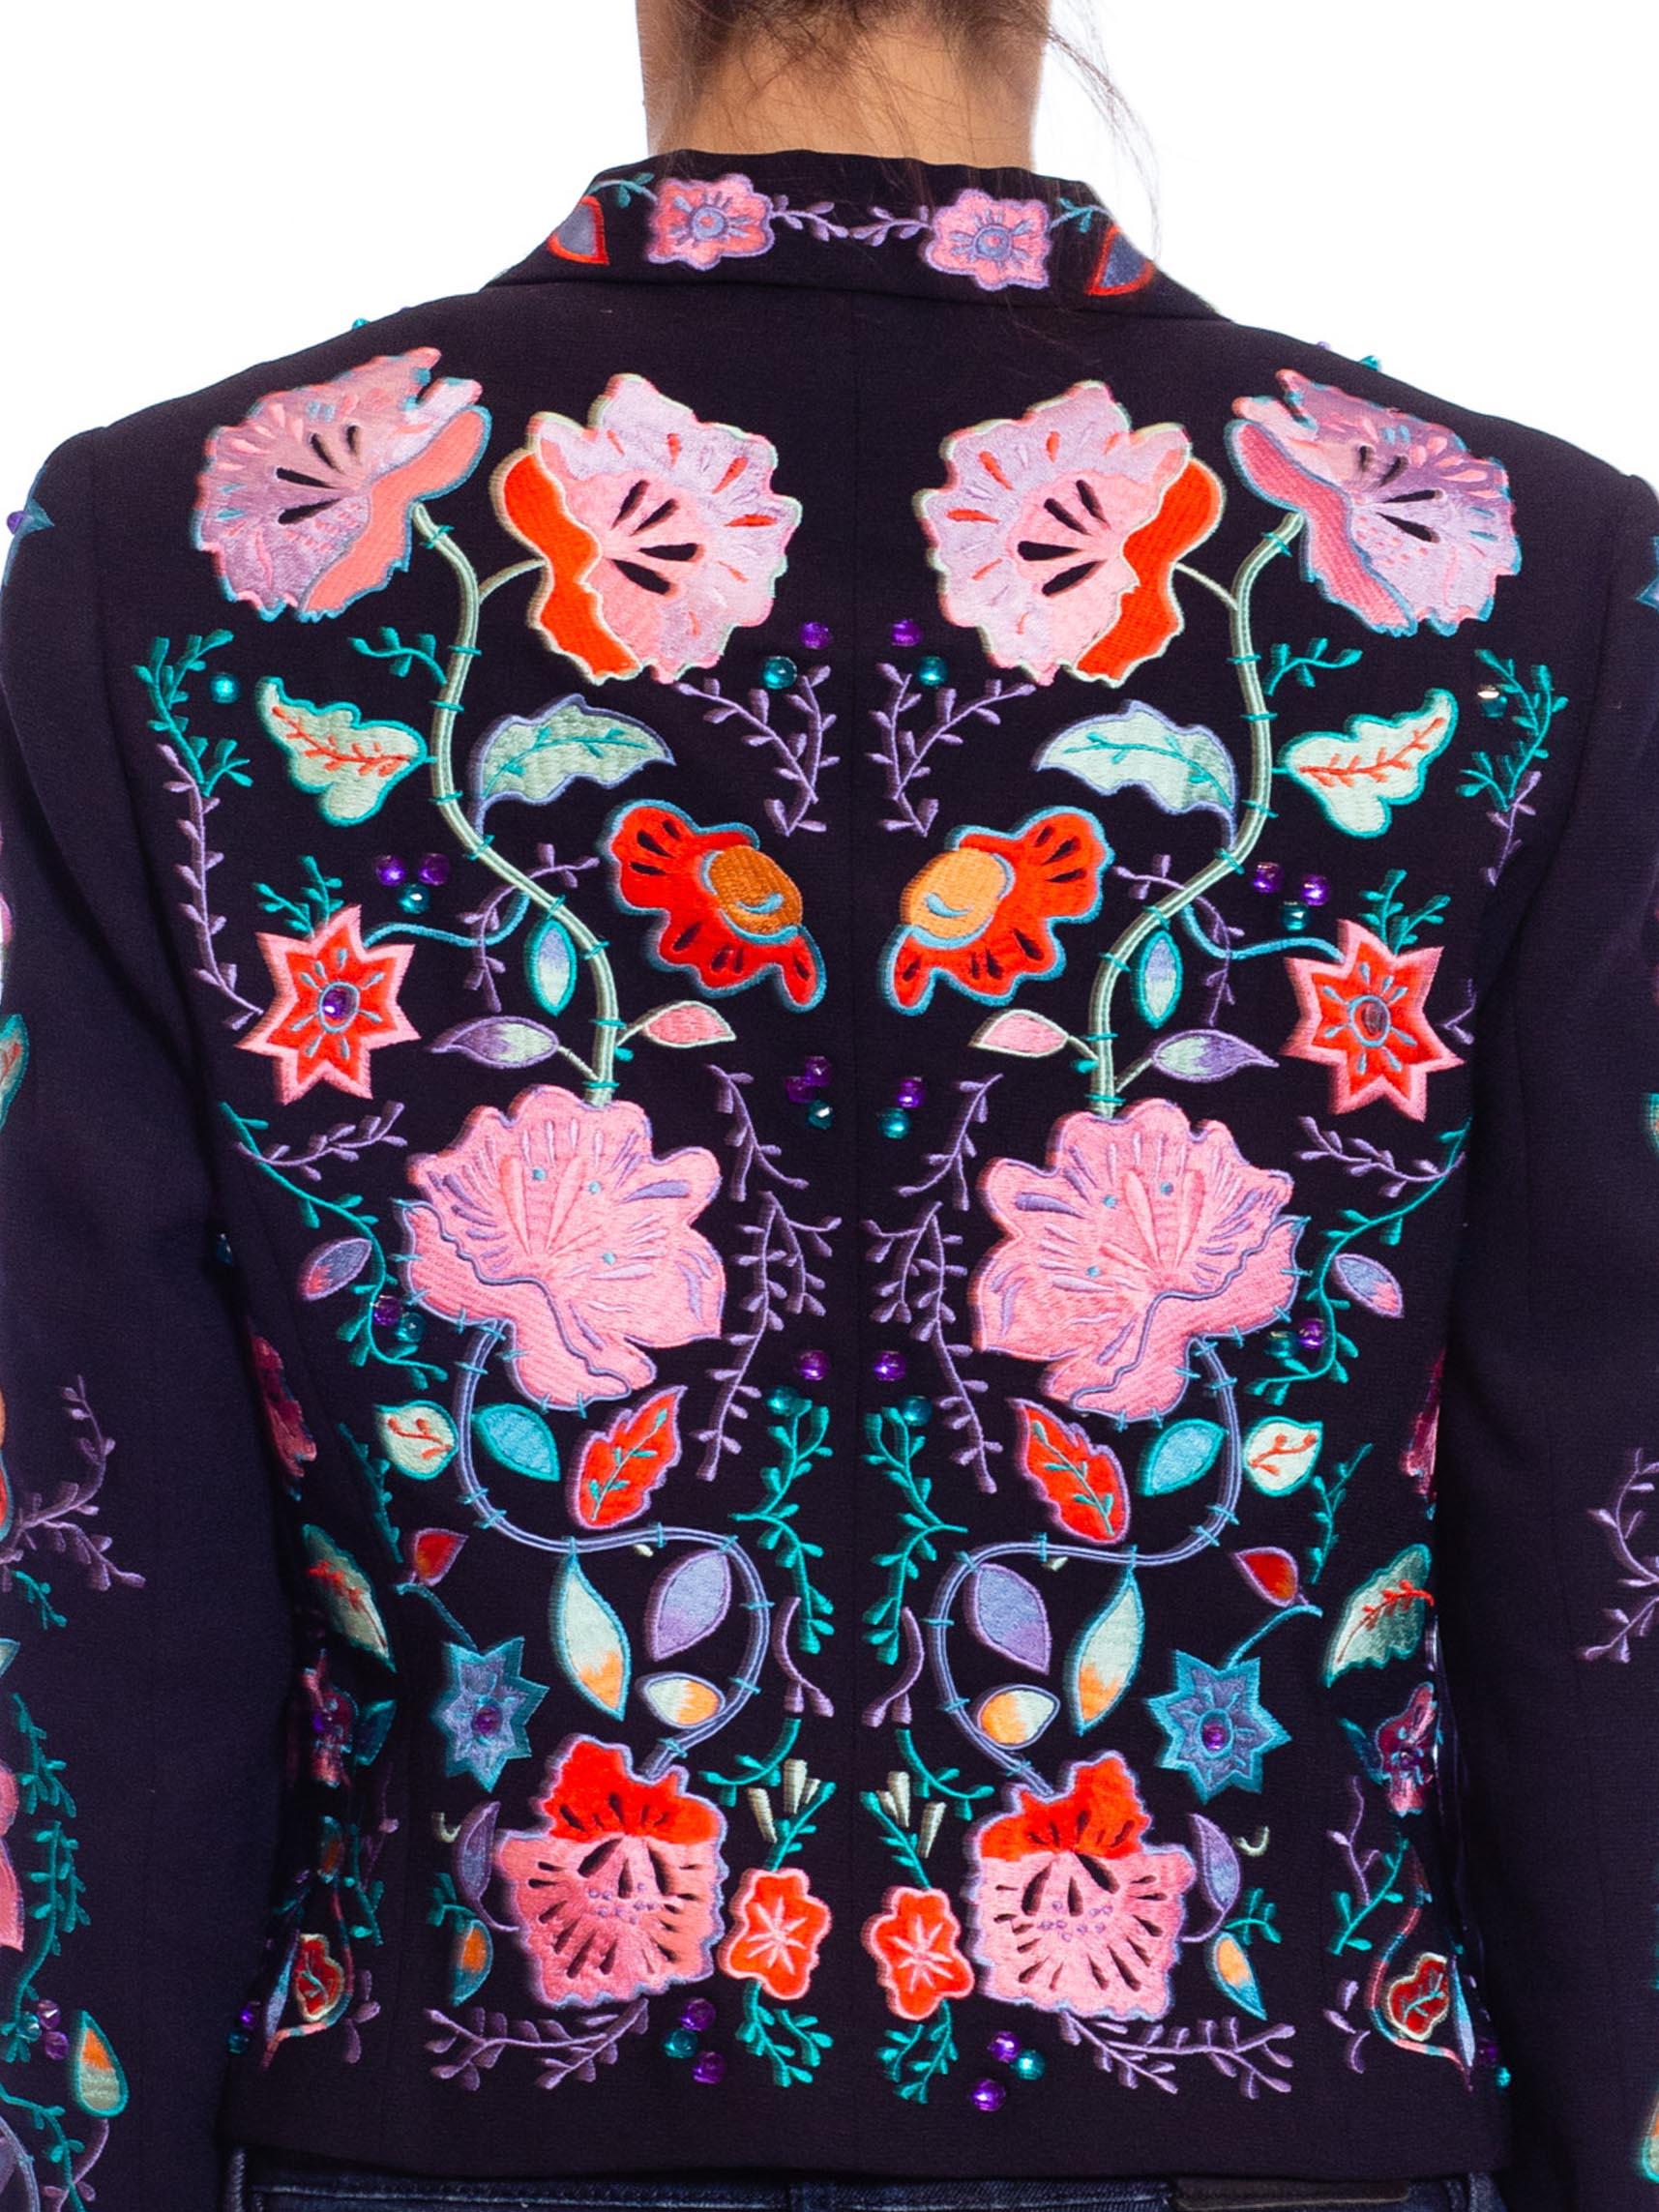 1990s Black Cotton Jacket with Pink and Purple embroidered flowers For Sale 2